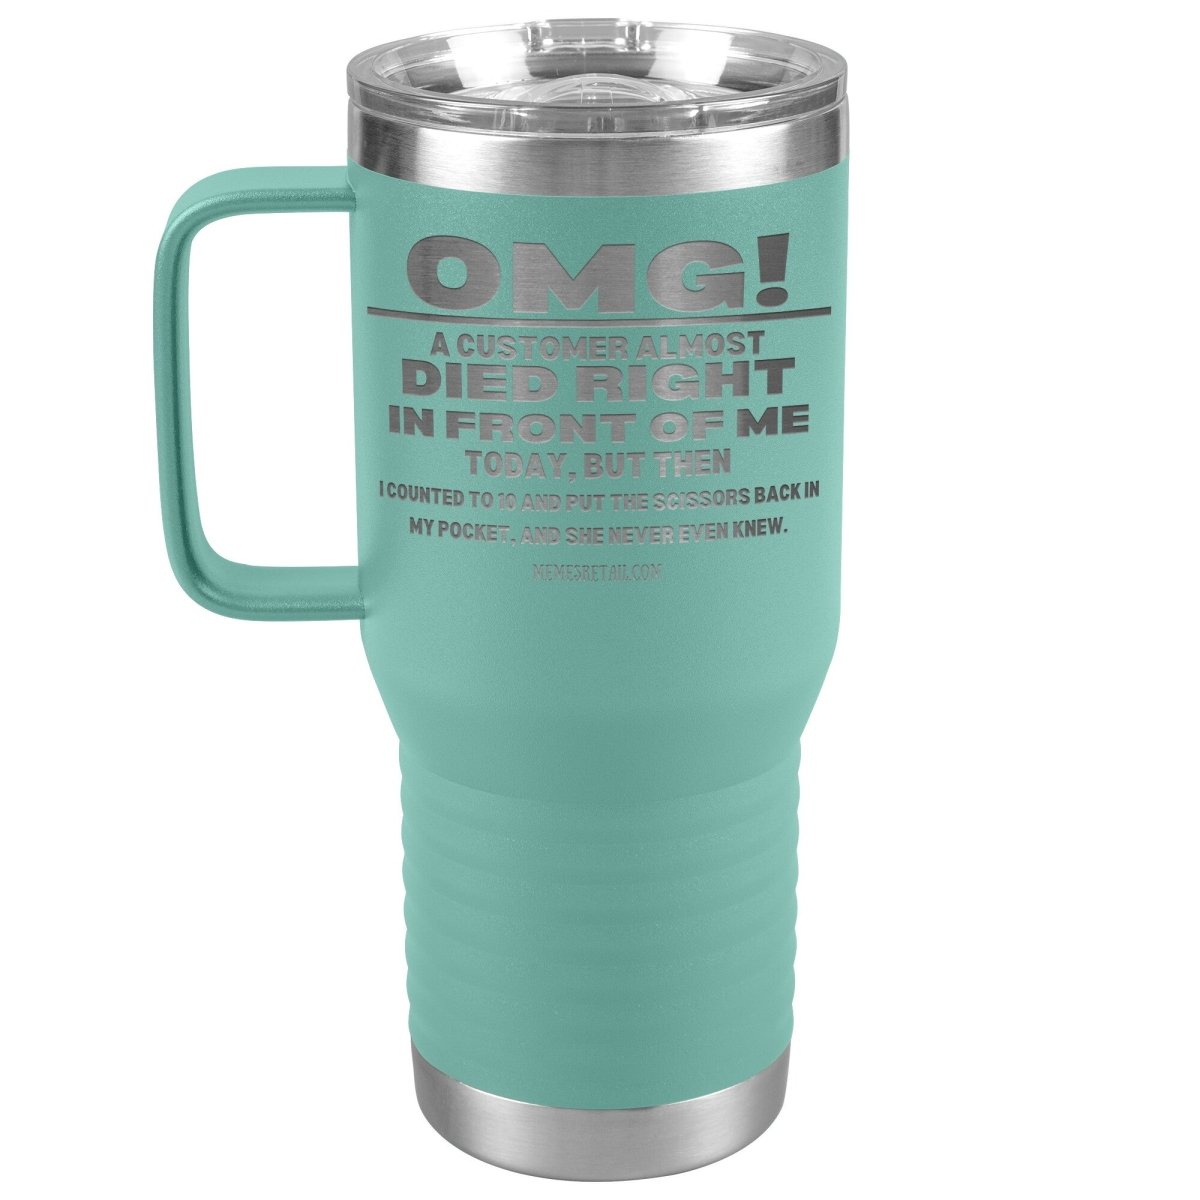 OMG! A Customer Almost Died Right In Front Of Me Tumbler, 20oz Travel Tumbler / Teal - MemesRetail.com